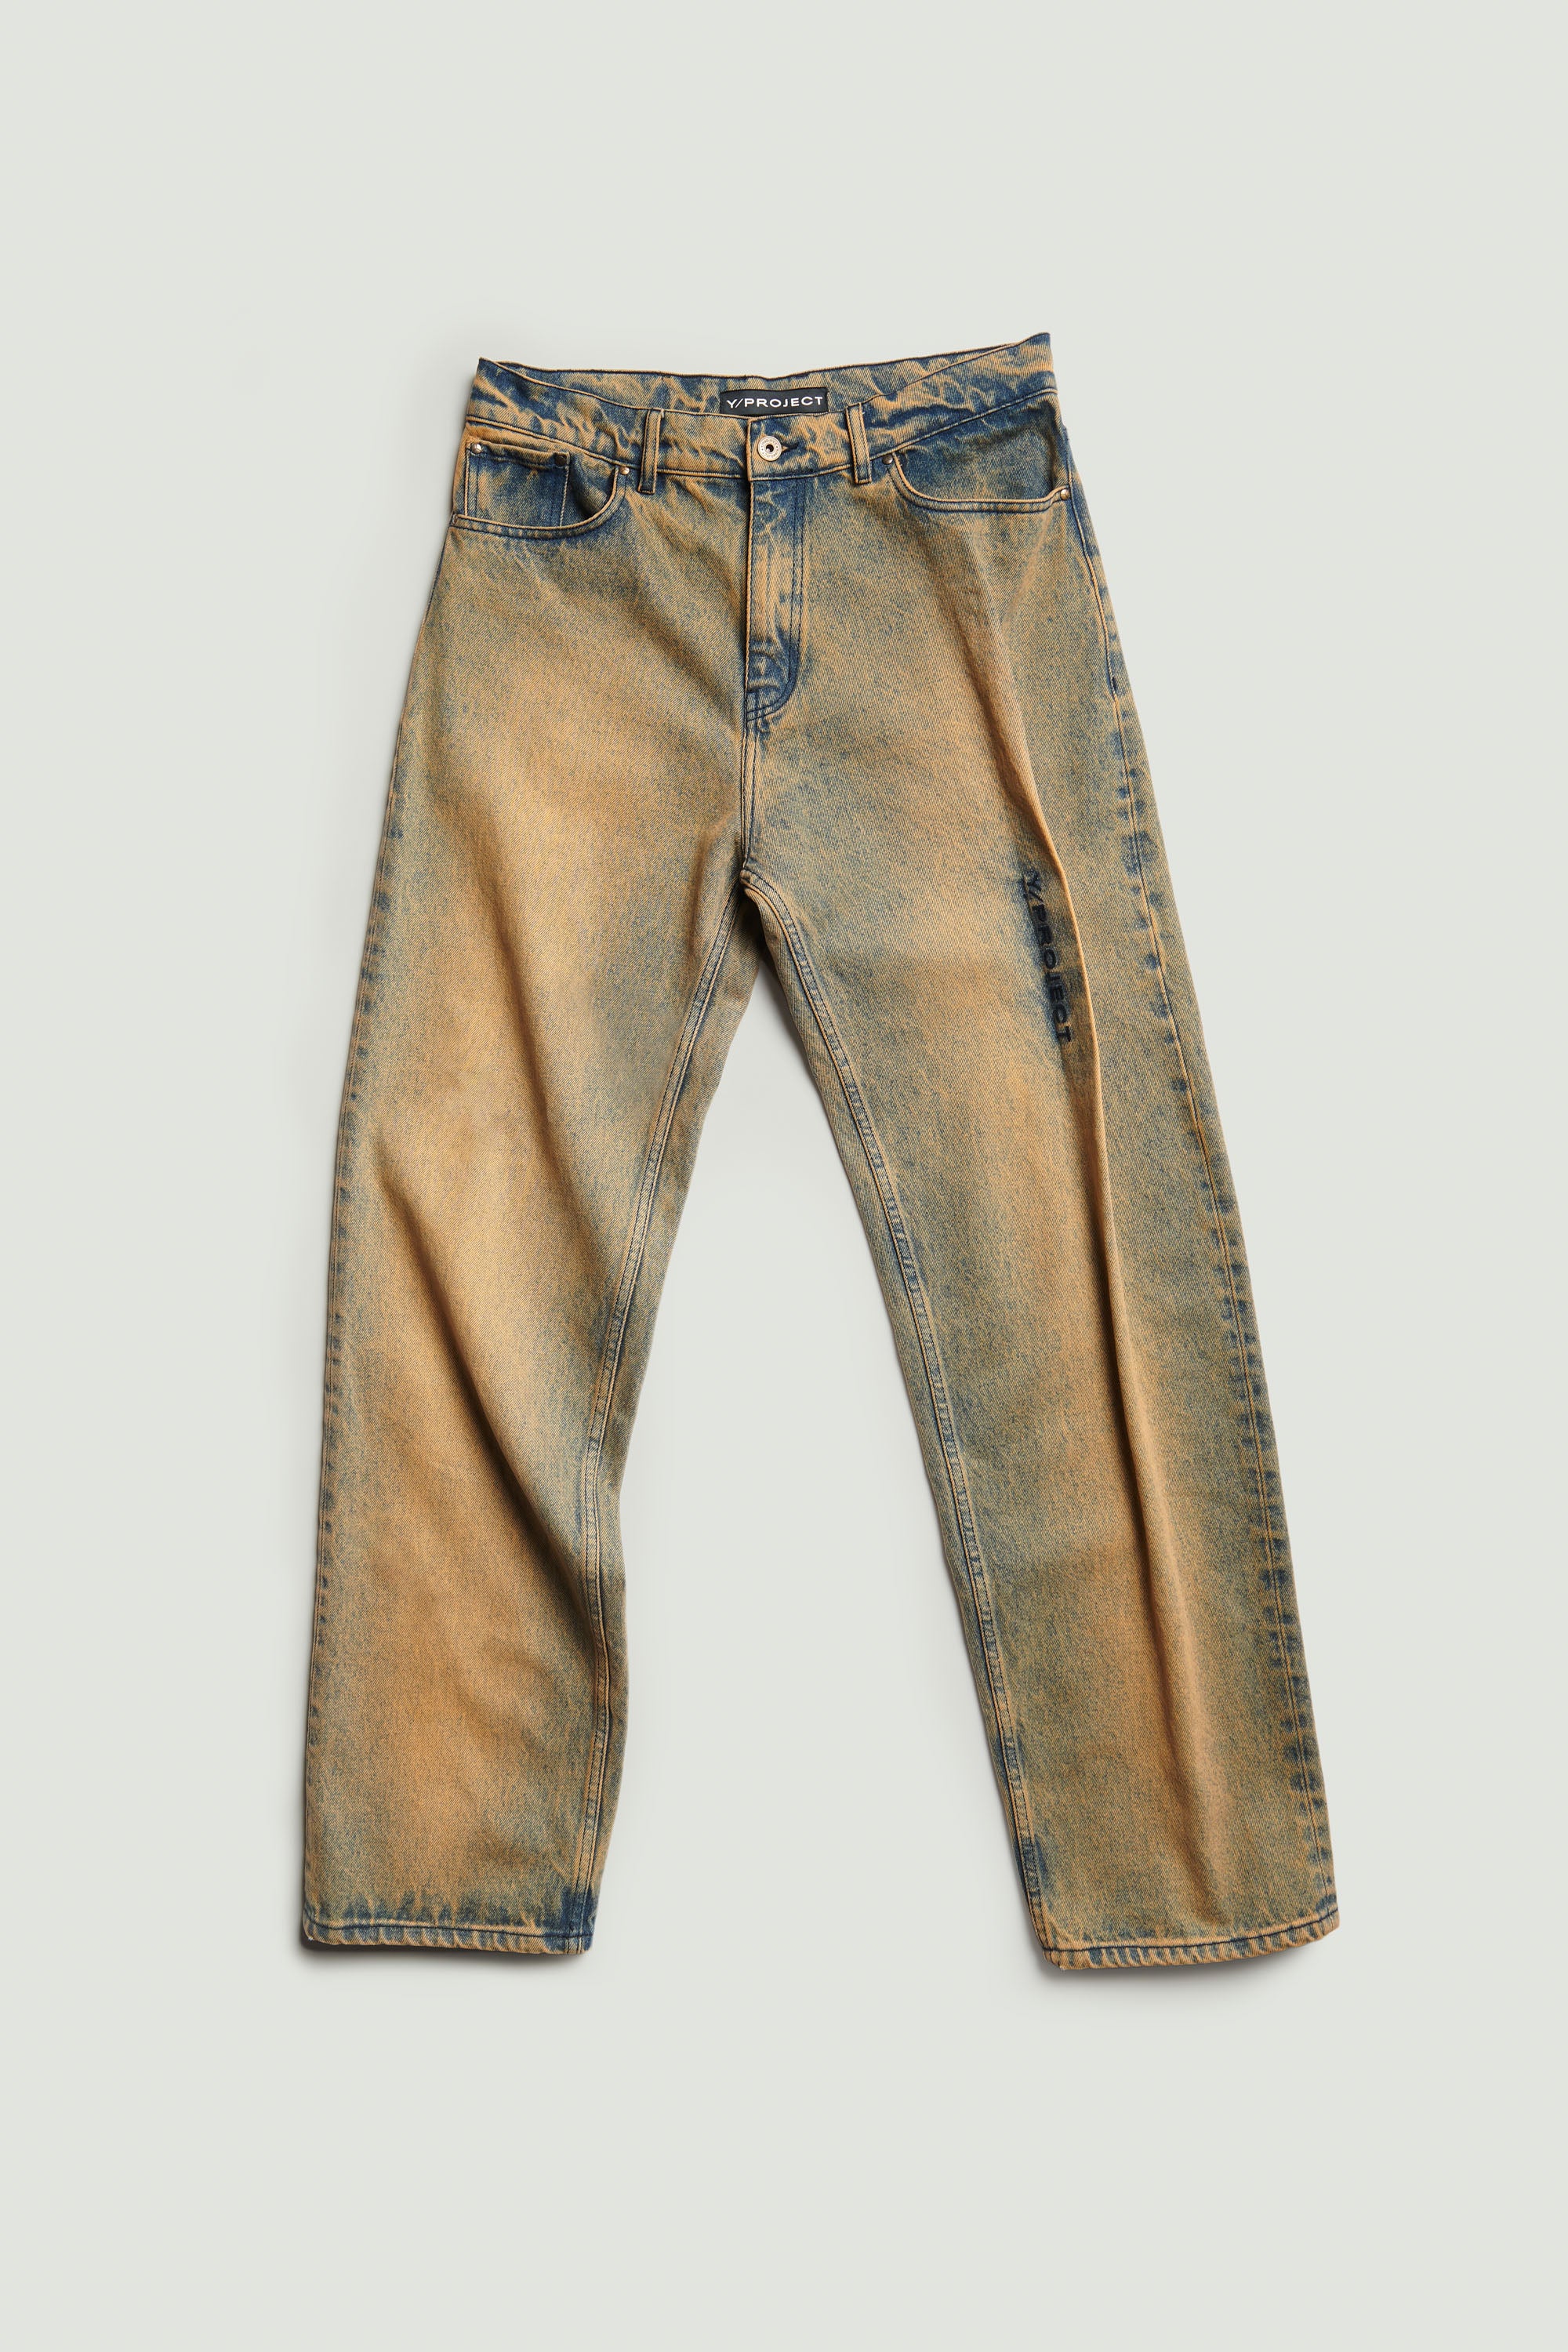 Y/Project Pinched Logo Jeans | conceitopilatesbh.com